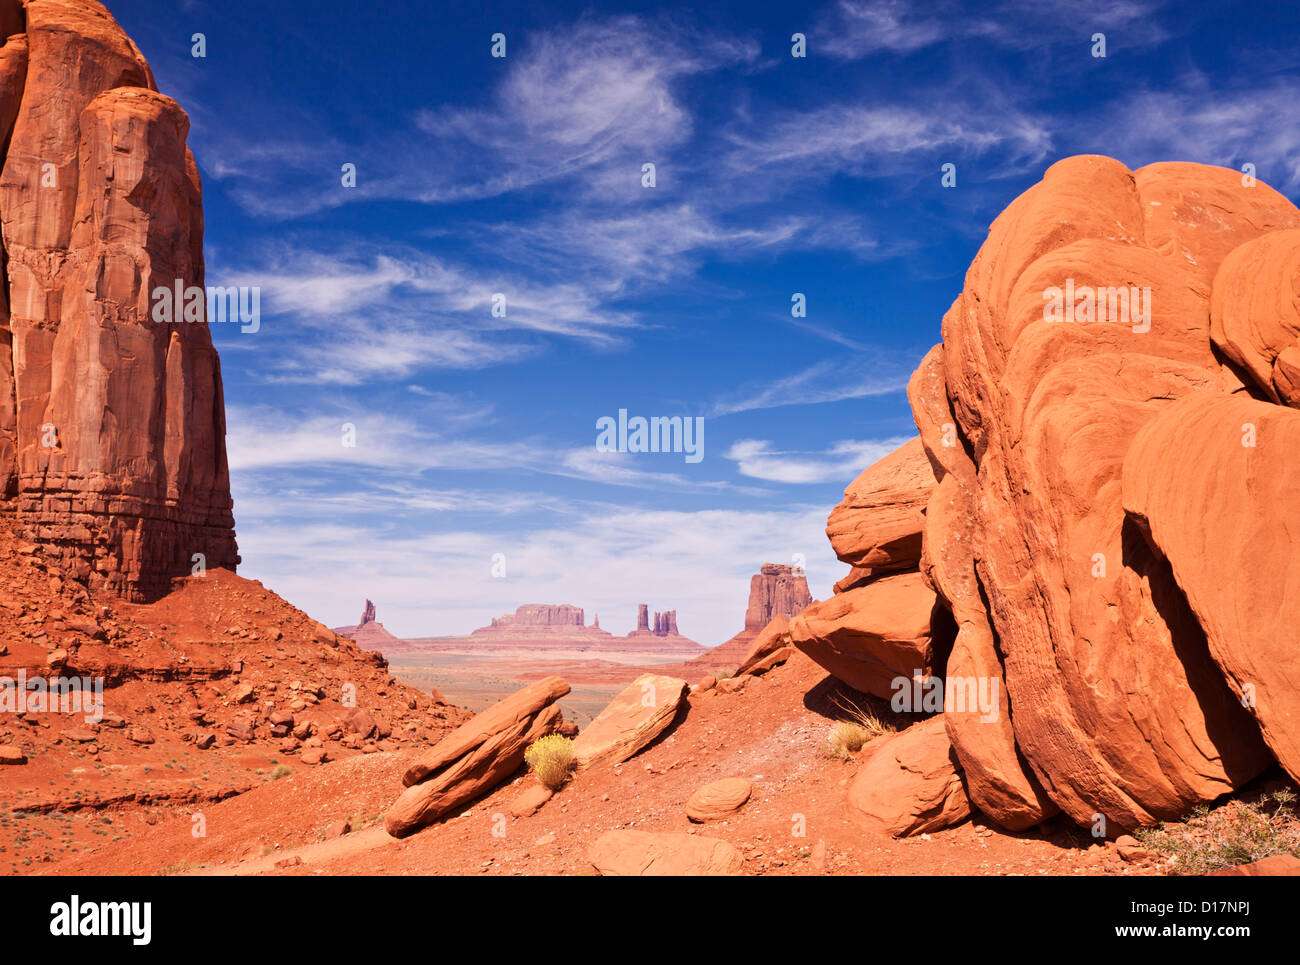 View of the Mittens from the North Window overlook Monument Valley Navajo Tribal Park, Arizona, USA United States of America Stock Photo